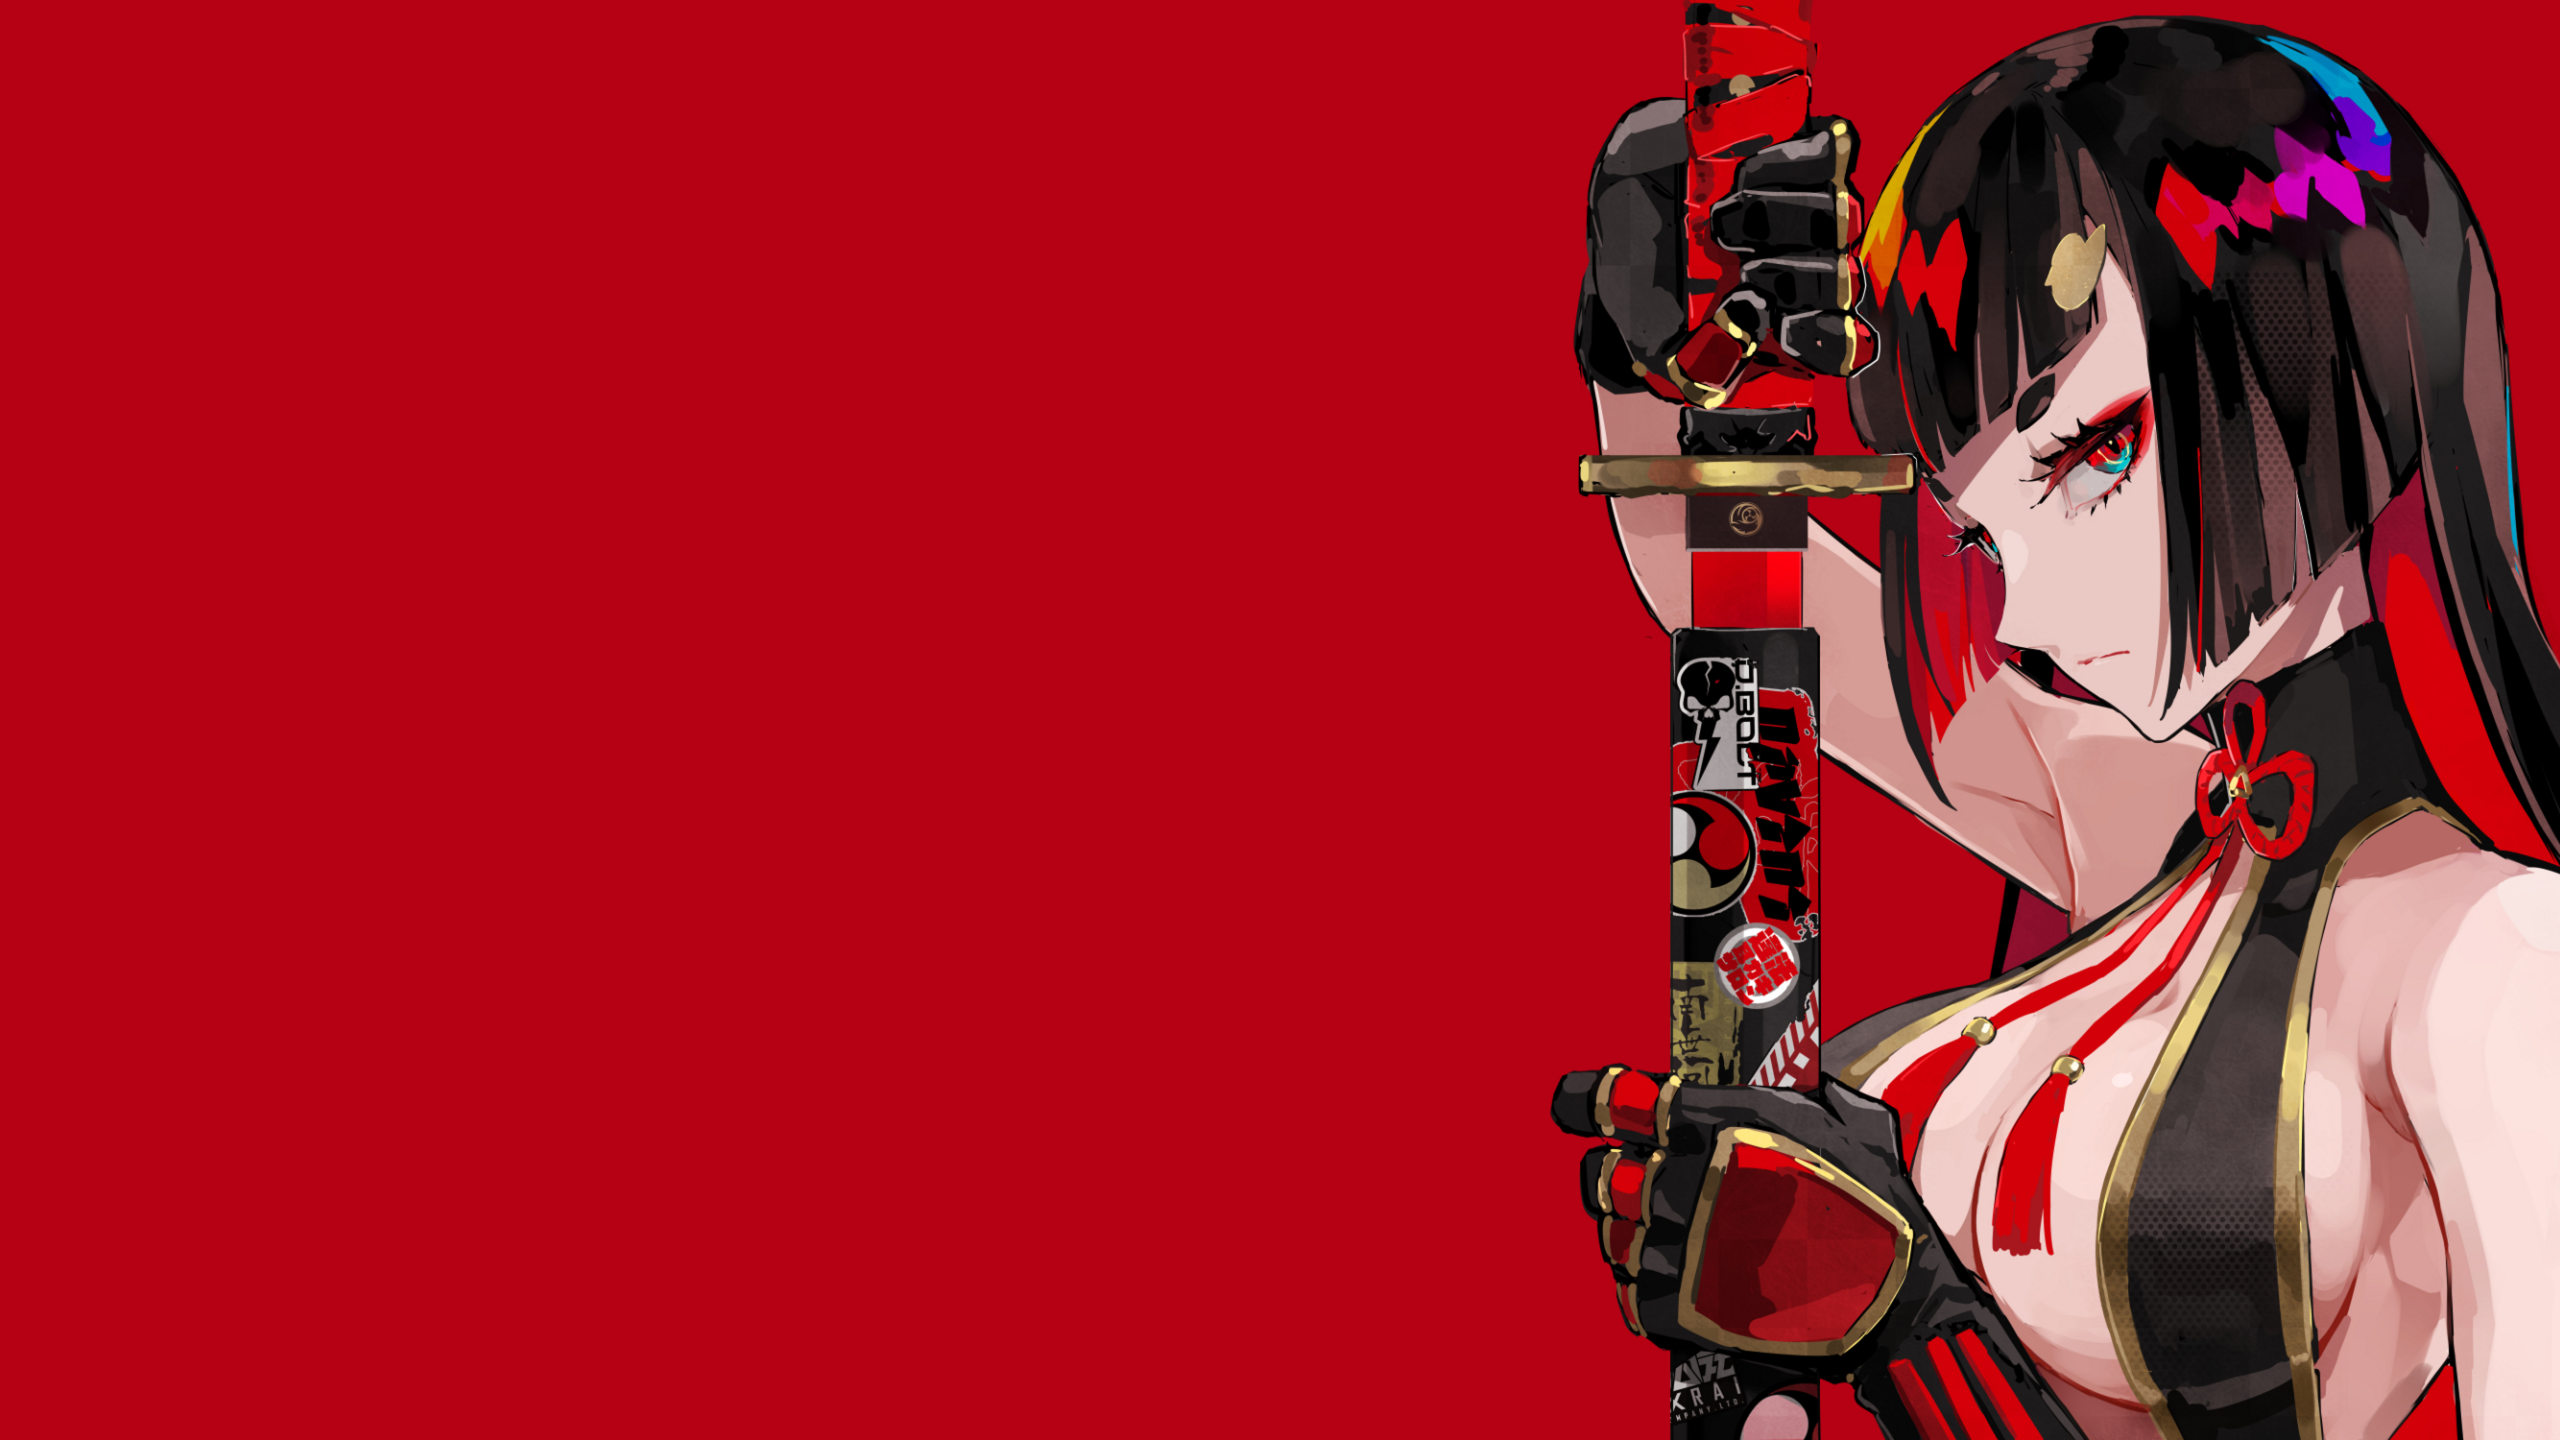 Anime 2560x1440 anime anime girls LAM artwork red background sword big boobs multi-colored hair looking at viewer simple background minimalism gloves